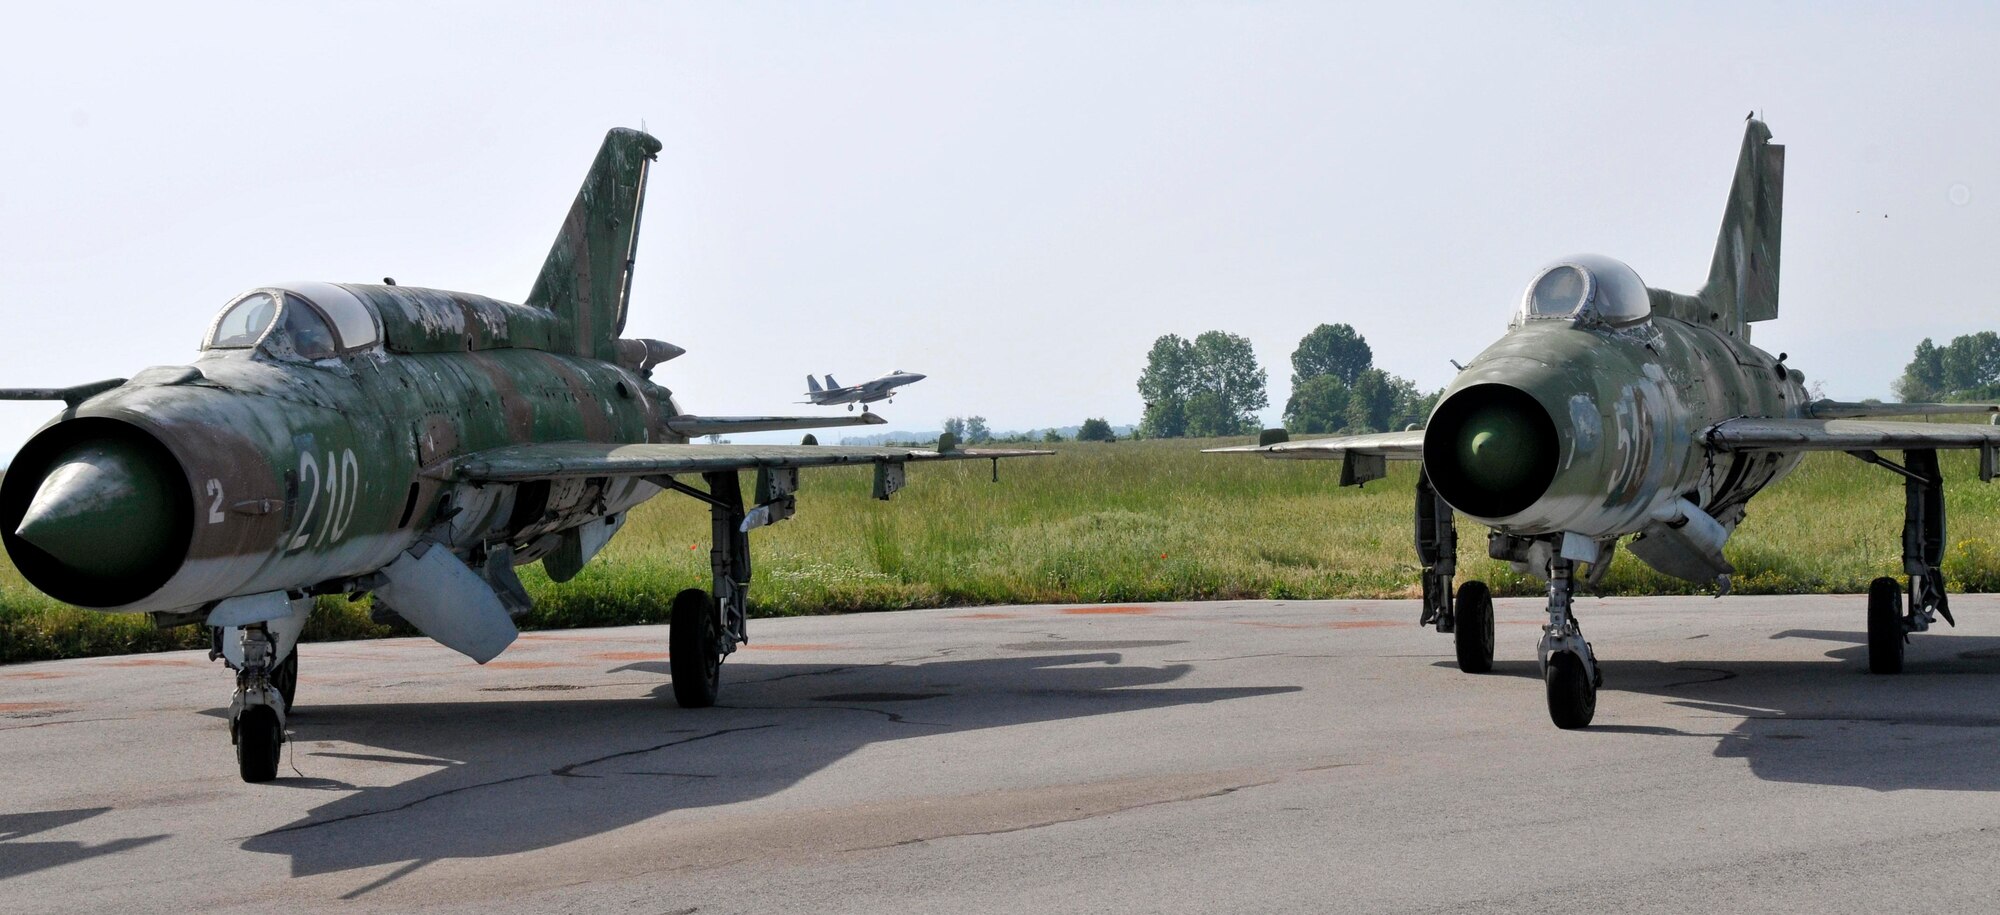 GRAF IGNATIEVO AIR FORCE BASE, Bulgaria - An F-15 from the 493rd Fighter Squadron at RAF Lakenheath, England, lands at Graf Ignatievo Air Force Base in Plovdiv, Bulgaria, May 13, with two MiG-21s parked in the foreground. Airmen from the 48th Fighter Wing are in Bulgaria taking part in Sentry Gold, an exercise developed to familiarize U.S. pilots with the MiG airframes, build partnerships with the Bulgarian air force and assist them in their continued integration into NATO operations.